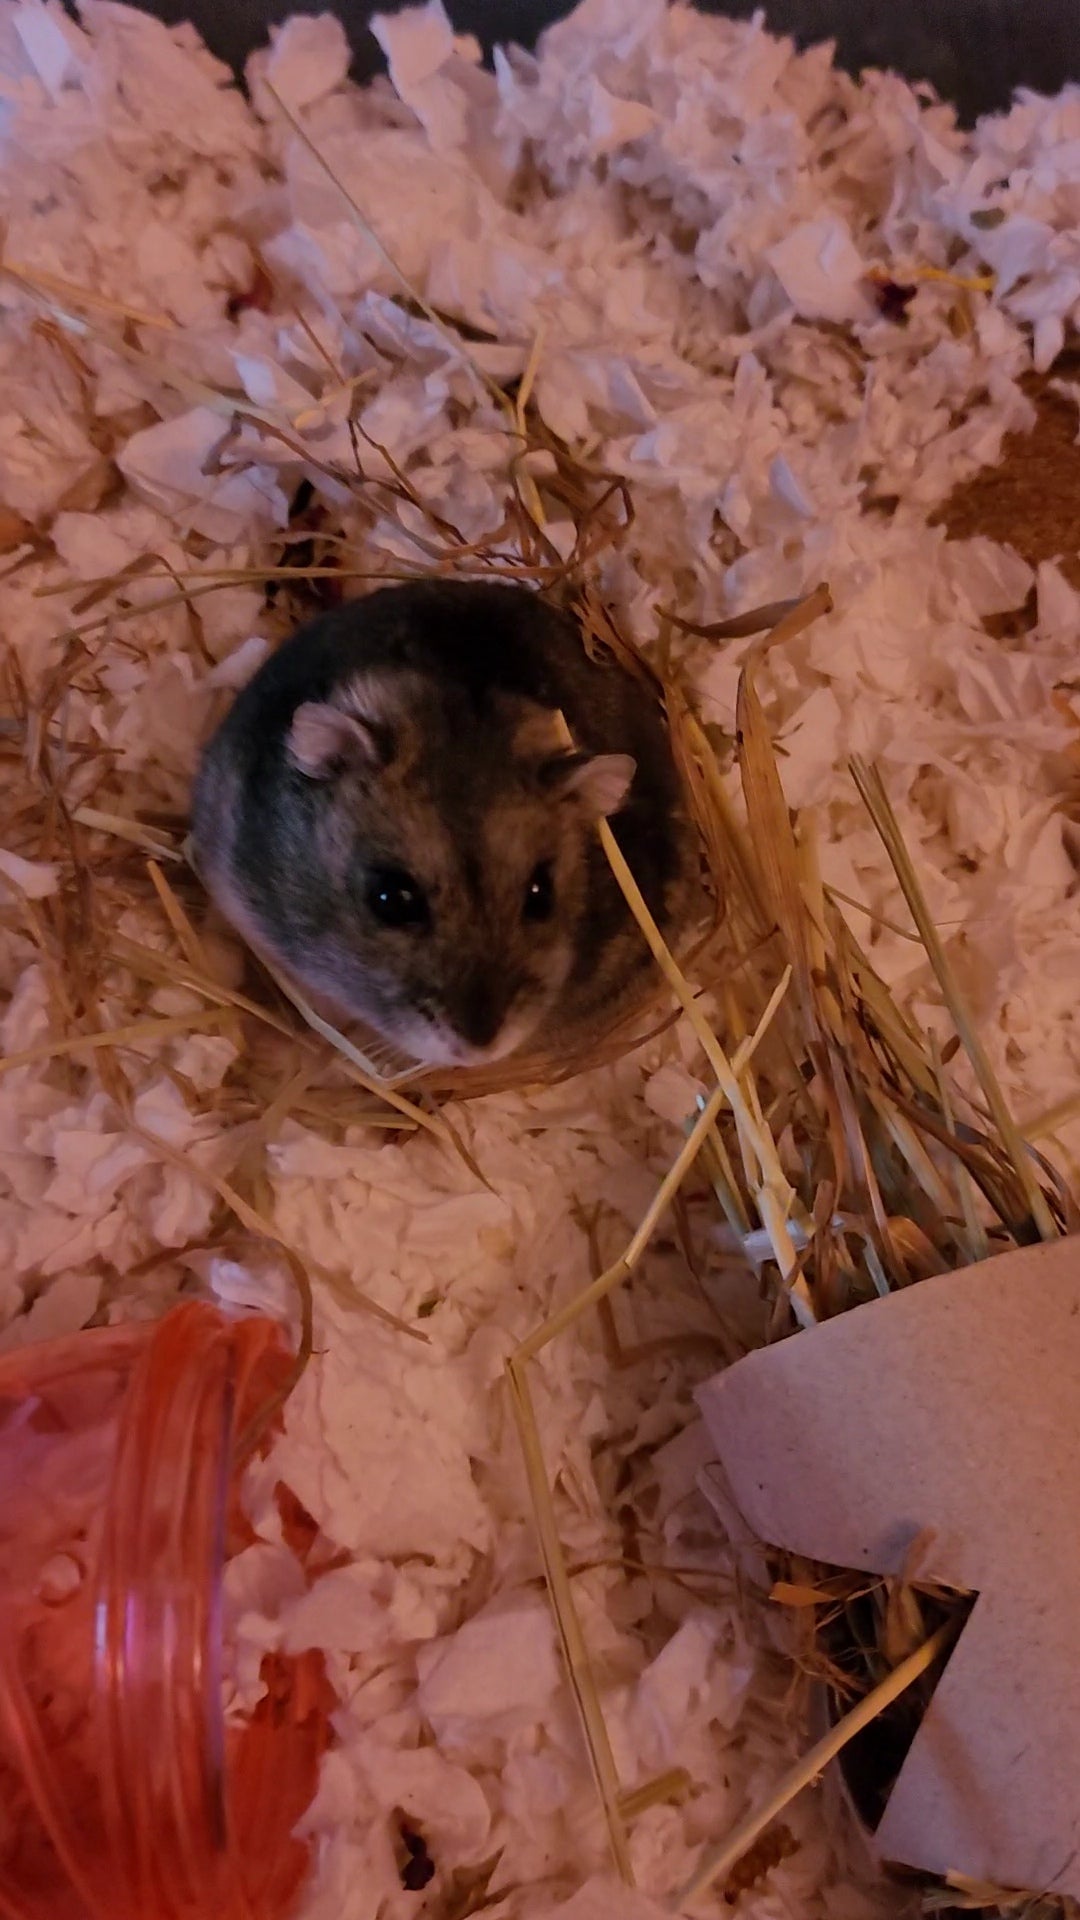 A hamster sat in bedding surrounded by hamster safe hay